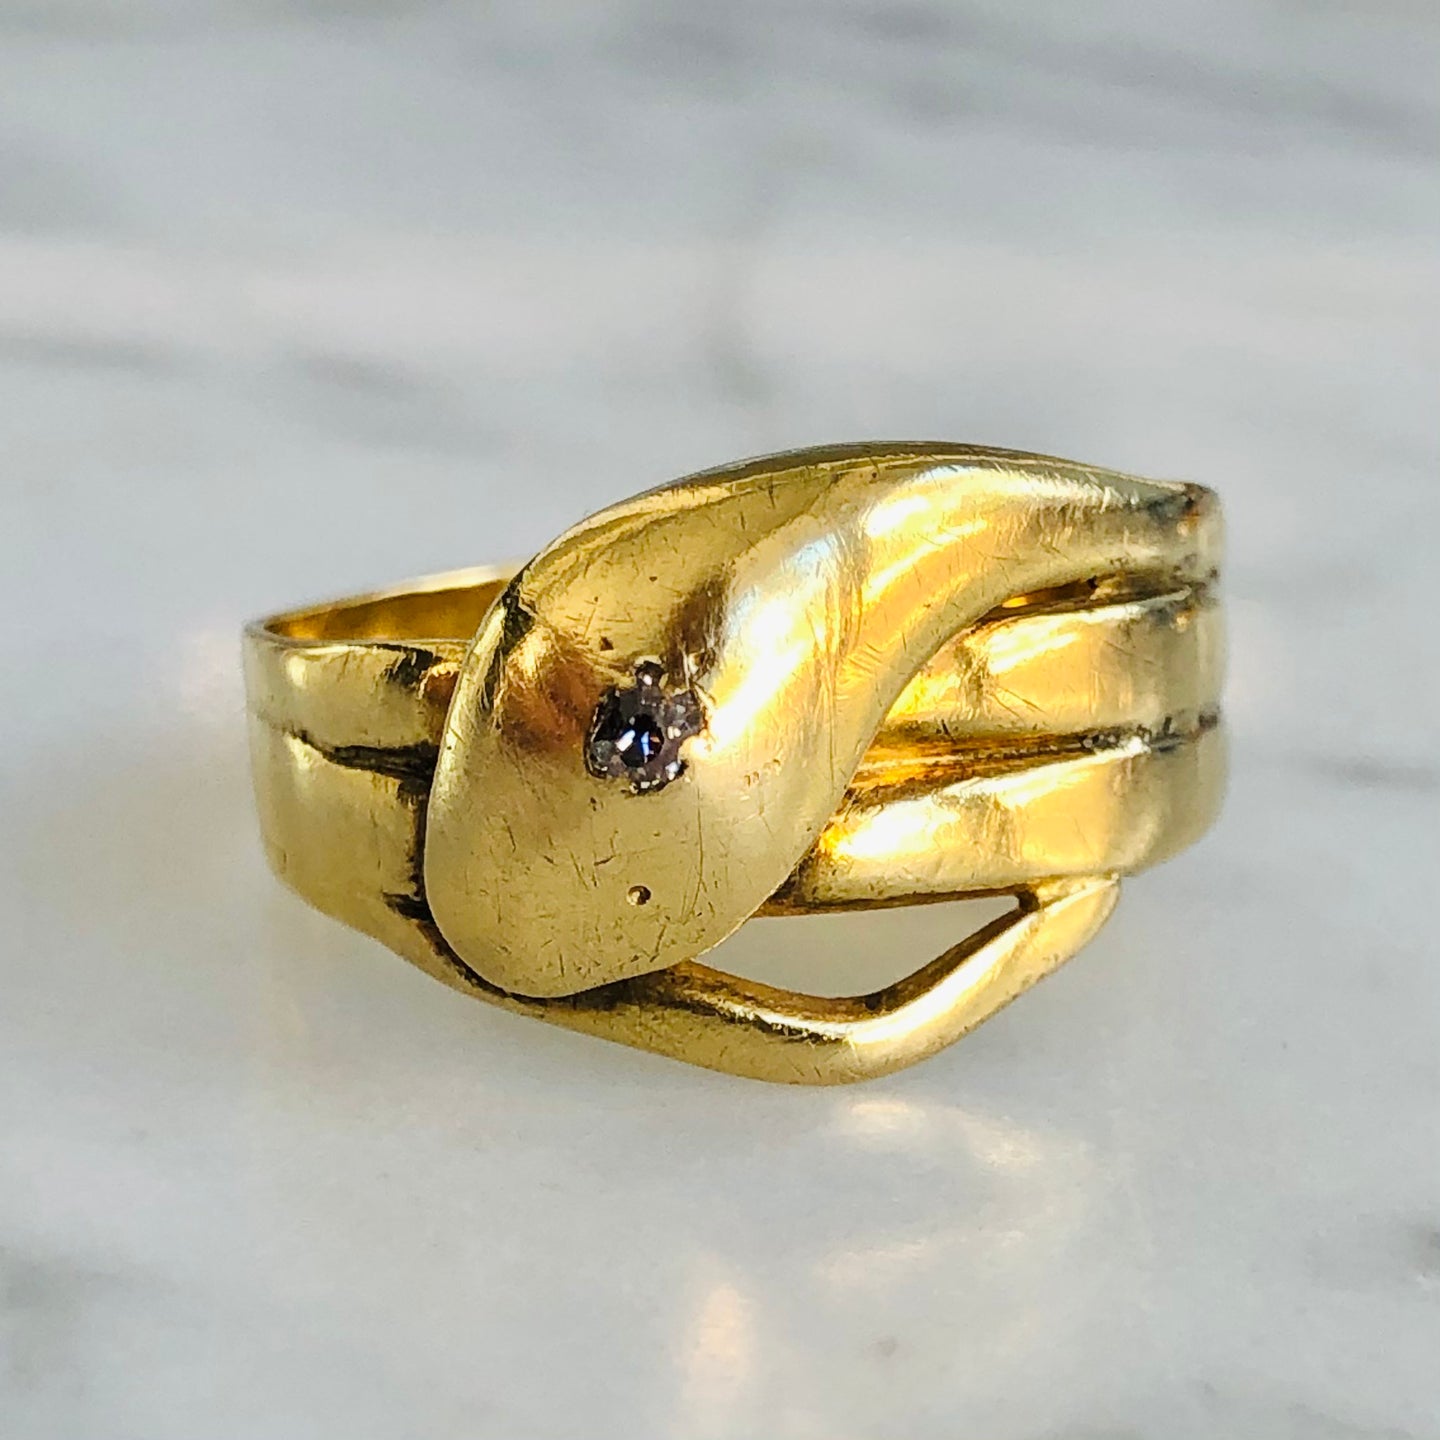 Gold Snake Ring With Diamond Detail